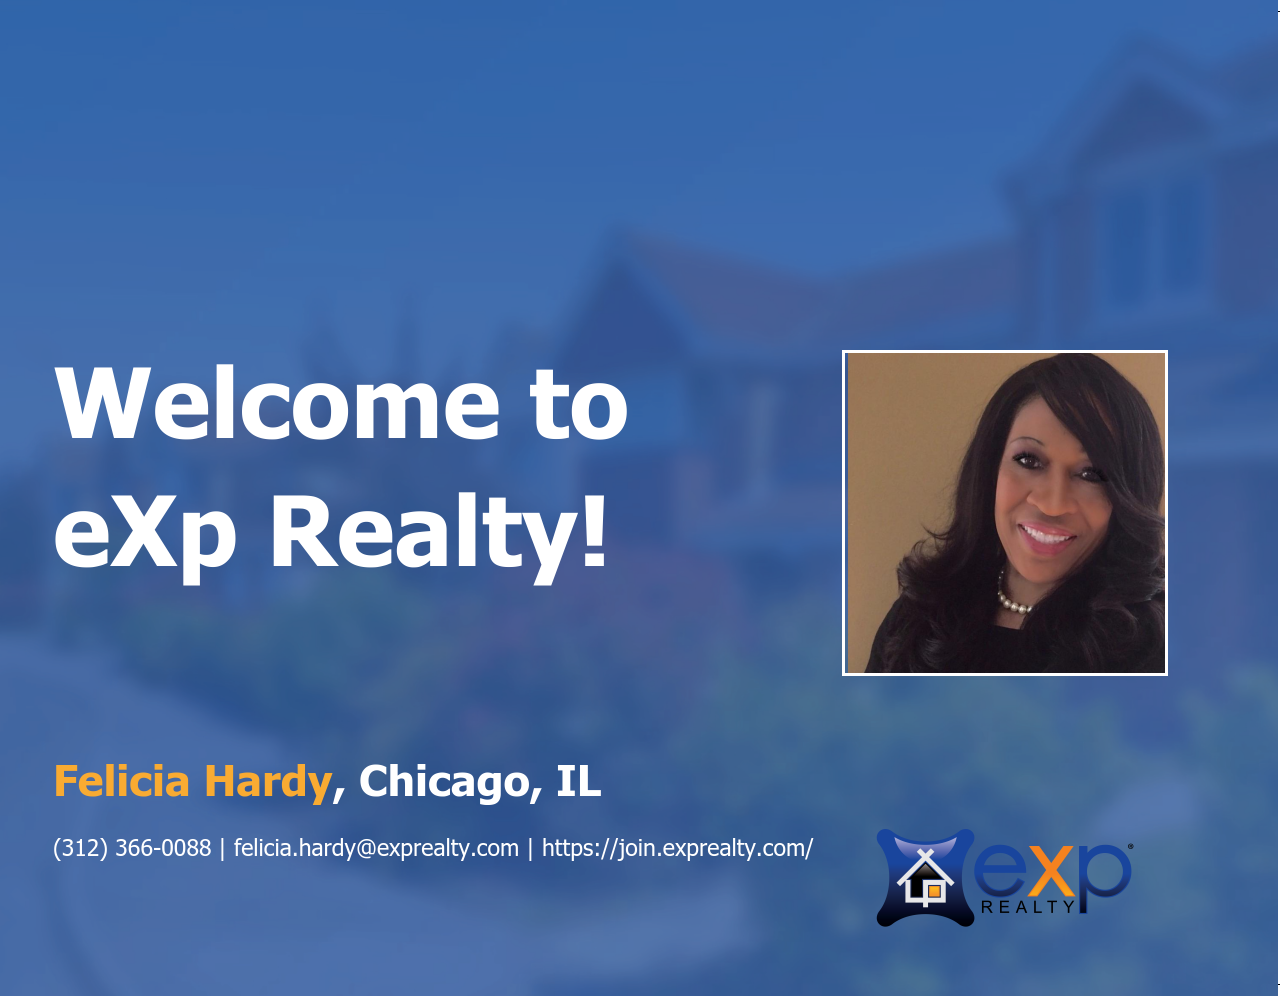 Felicia Hardy Joined eXp Realty!